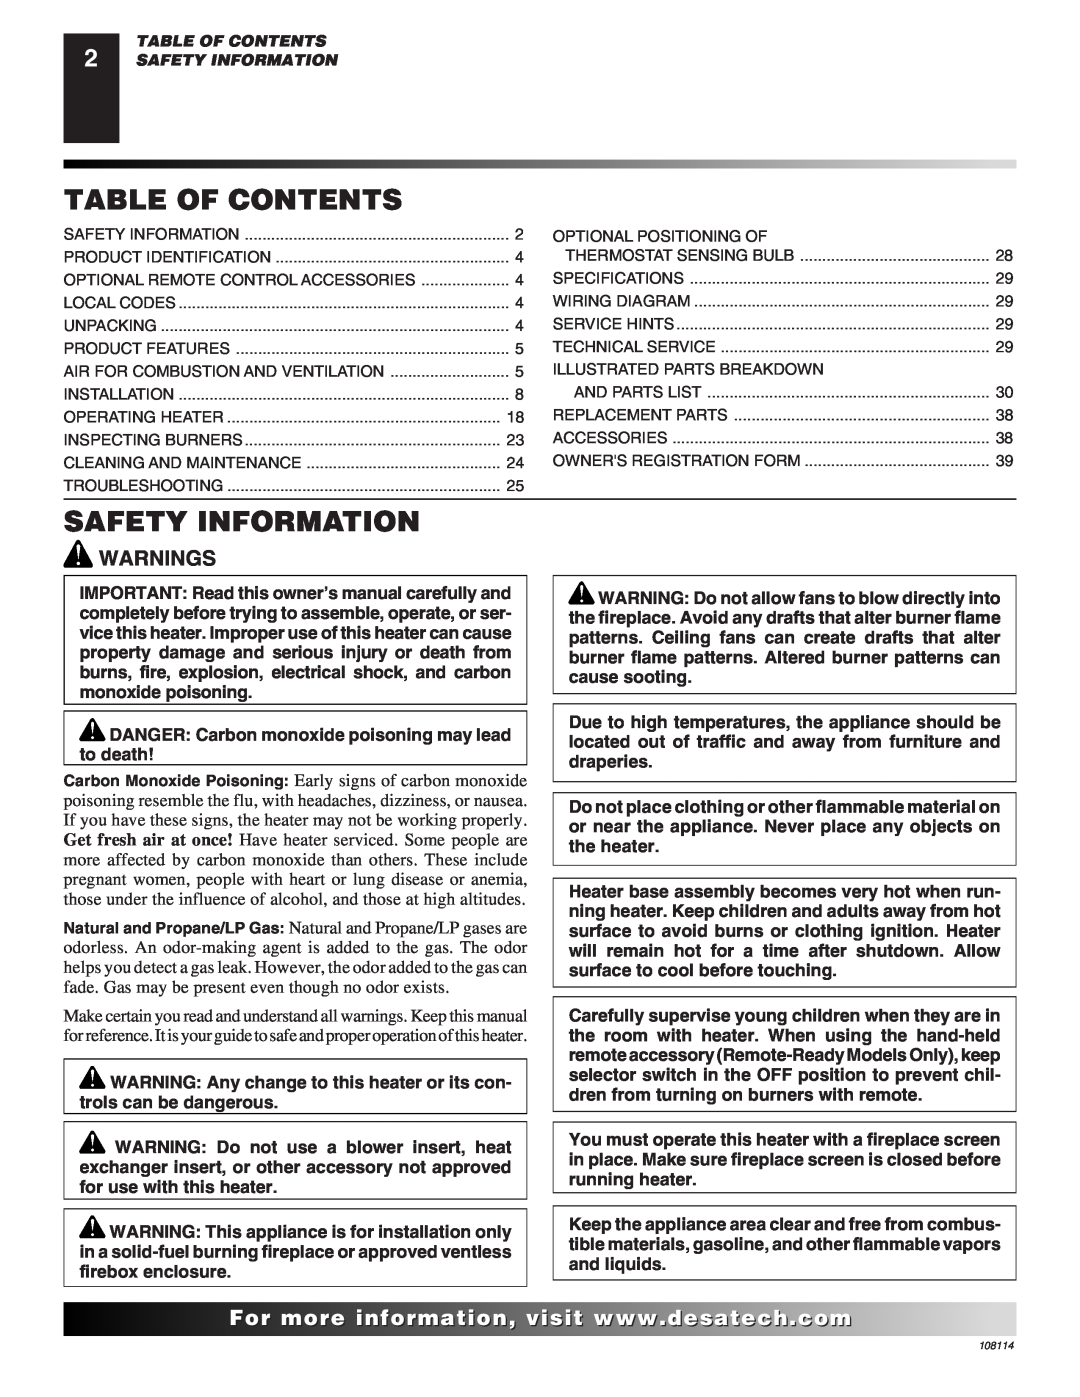 Desa INTERNATIONAL UNVENTED (VENT-FREE) GAS LOG HEATER installation manual Table Of Contents, Safety Information, Warnings 